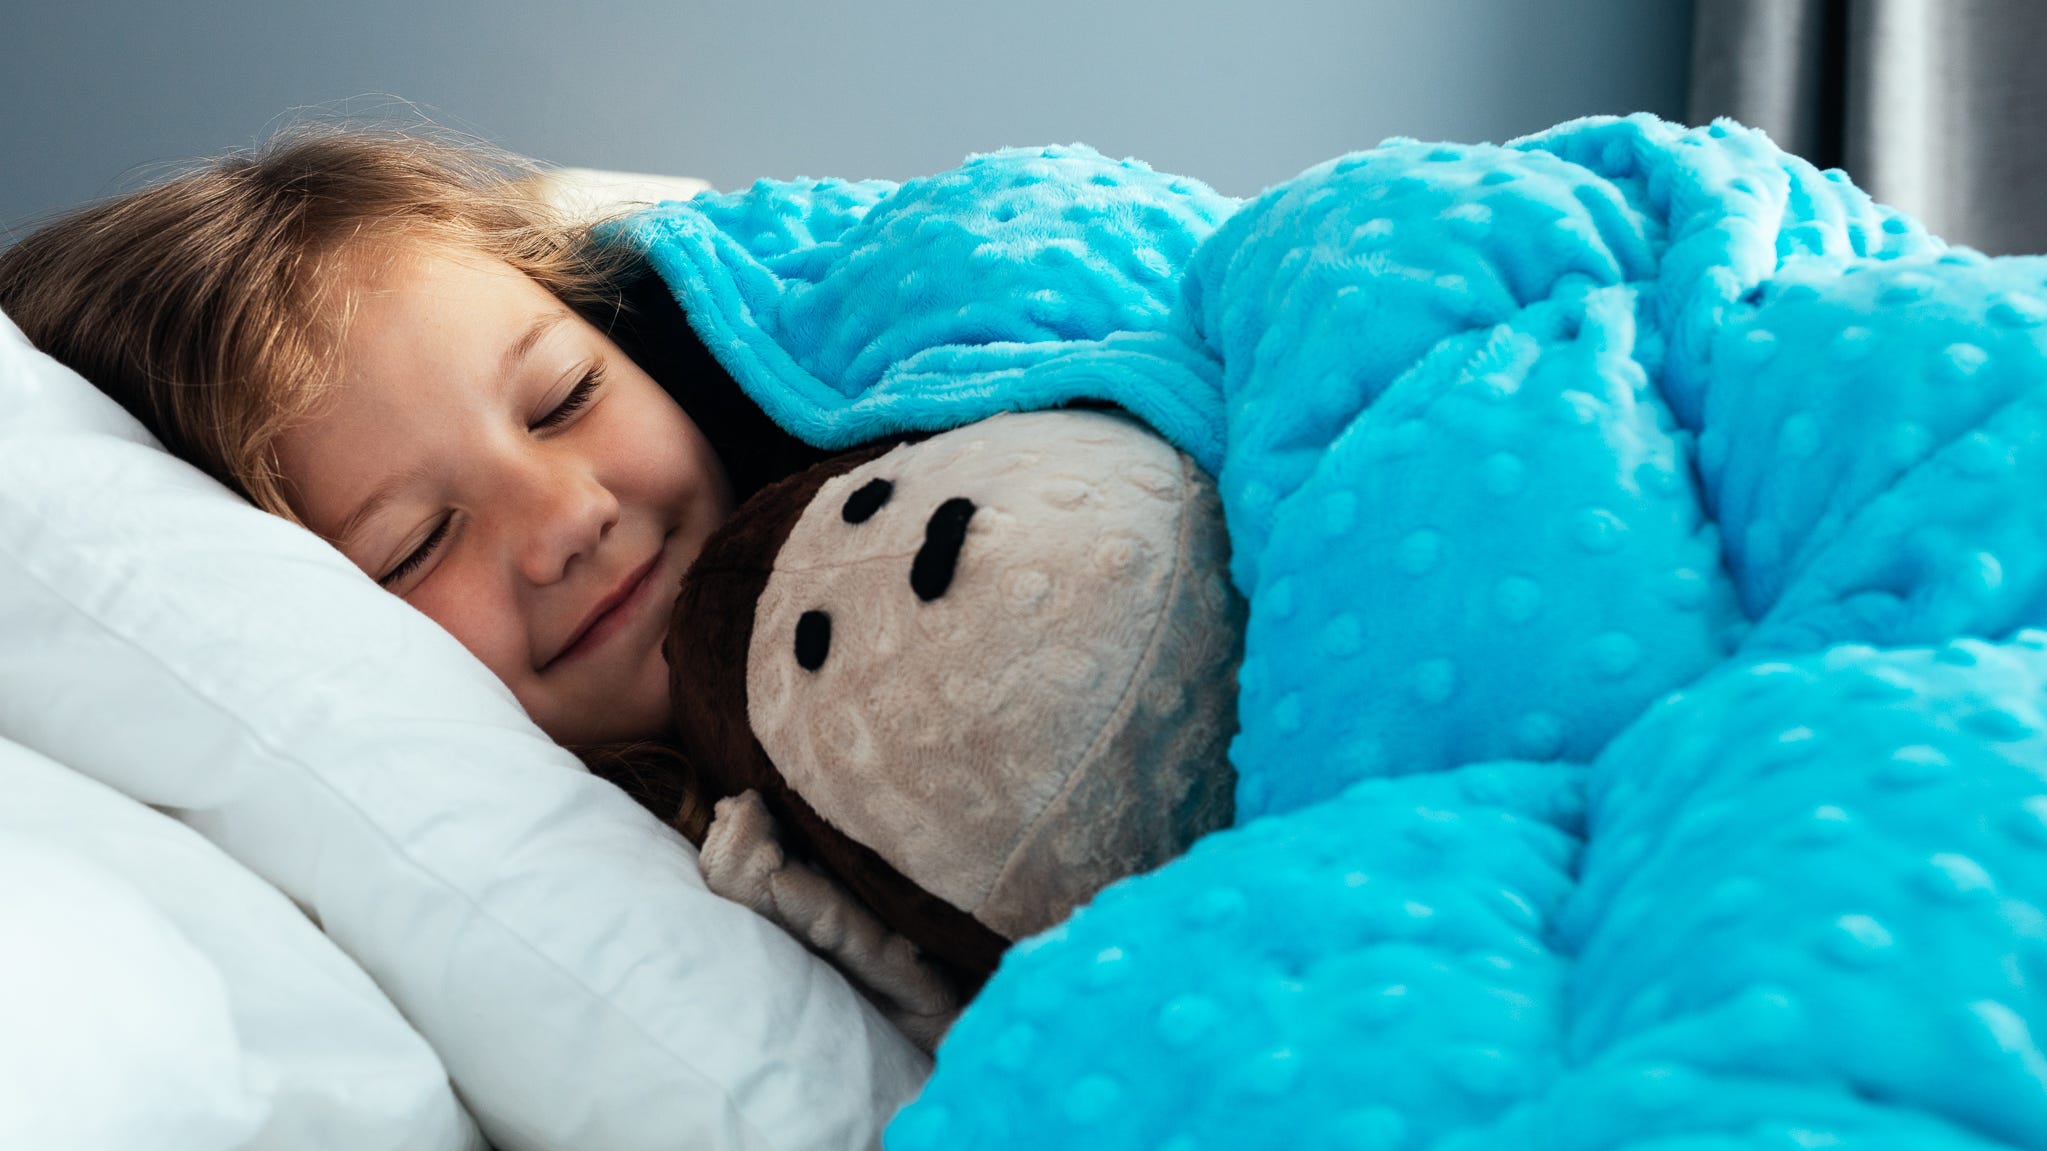 What are weighted blankets and why are they so popular?